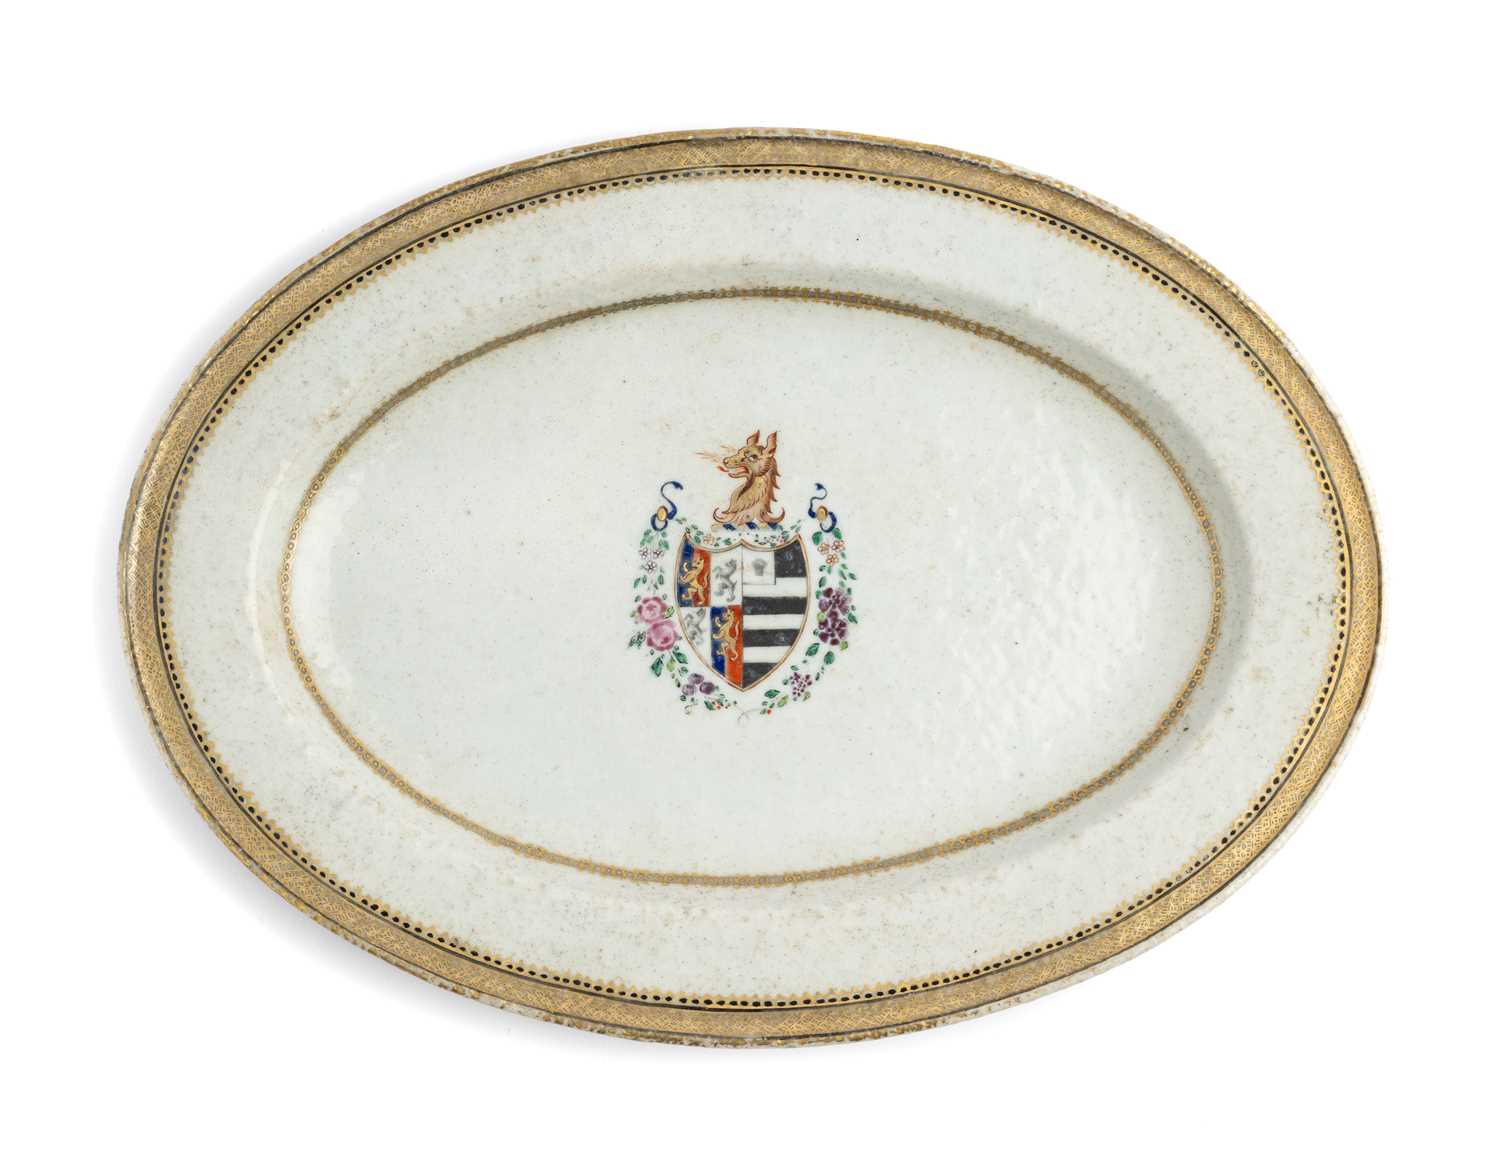 A CHINESE EXPORT ARMORIAL OVAL SERVING DISH, QIANLONG PERIOD, CIRCA 1785